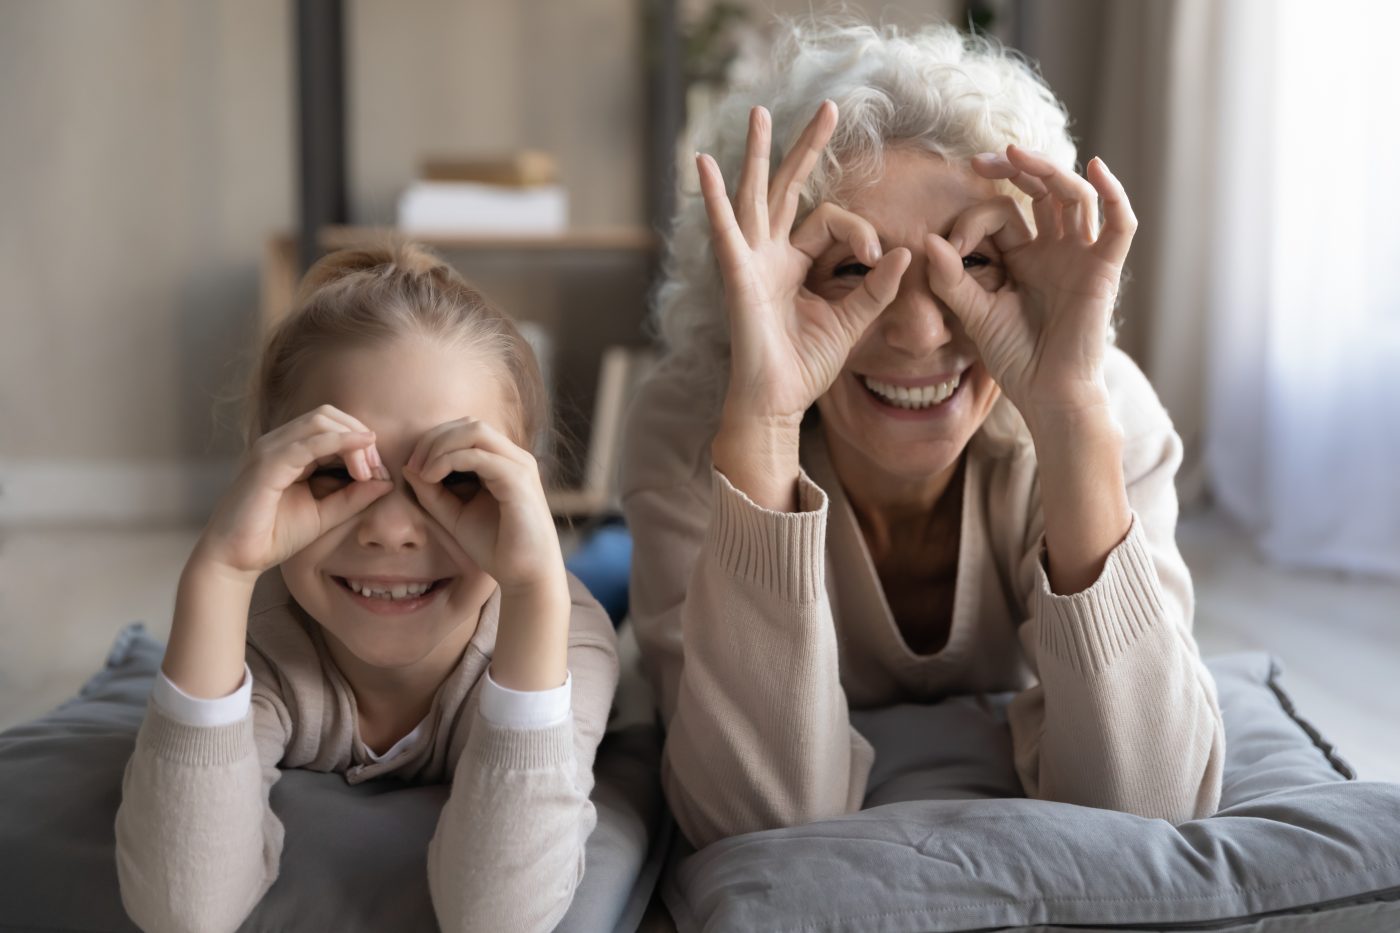 Funny goggles. Portrait of cheerful little girl grandchild lying on floor with senior granny playing having fun look at camera show binoculars glasses of fingers. Good vision and eye care for all ages